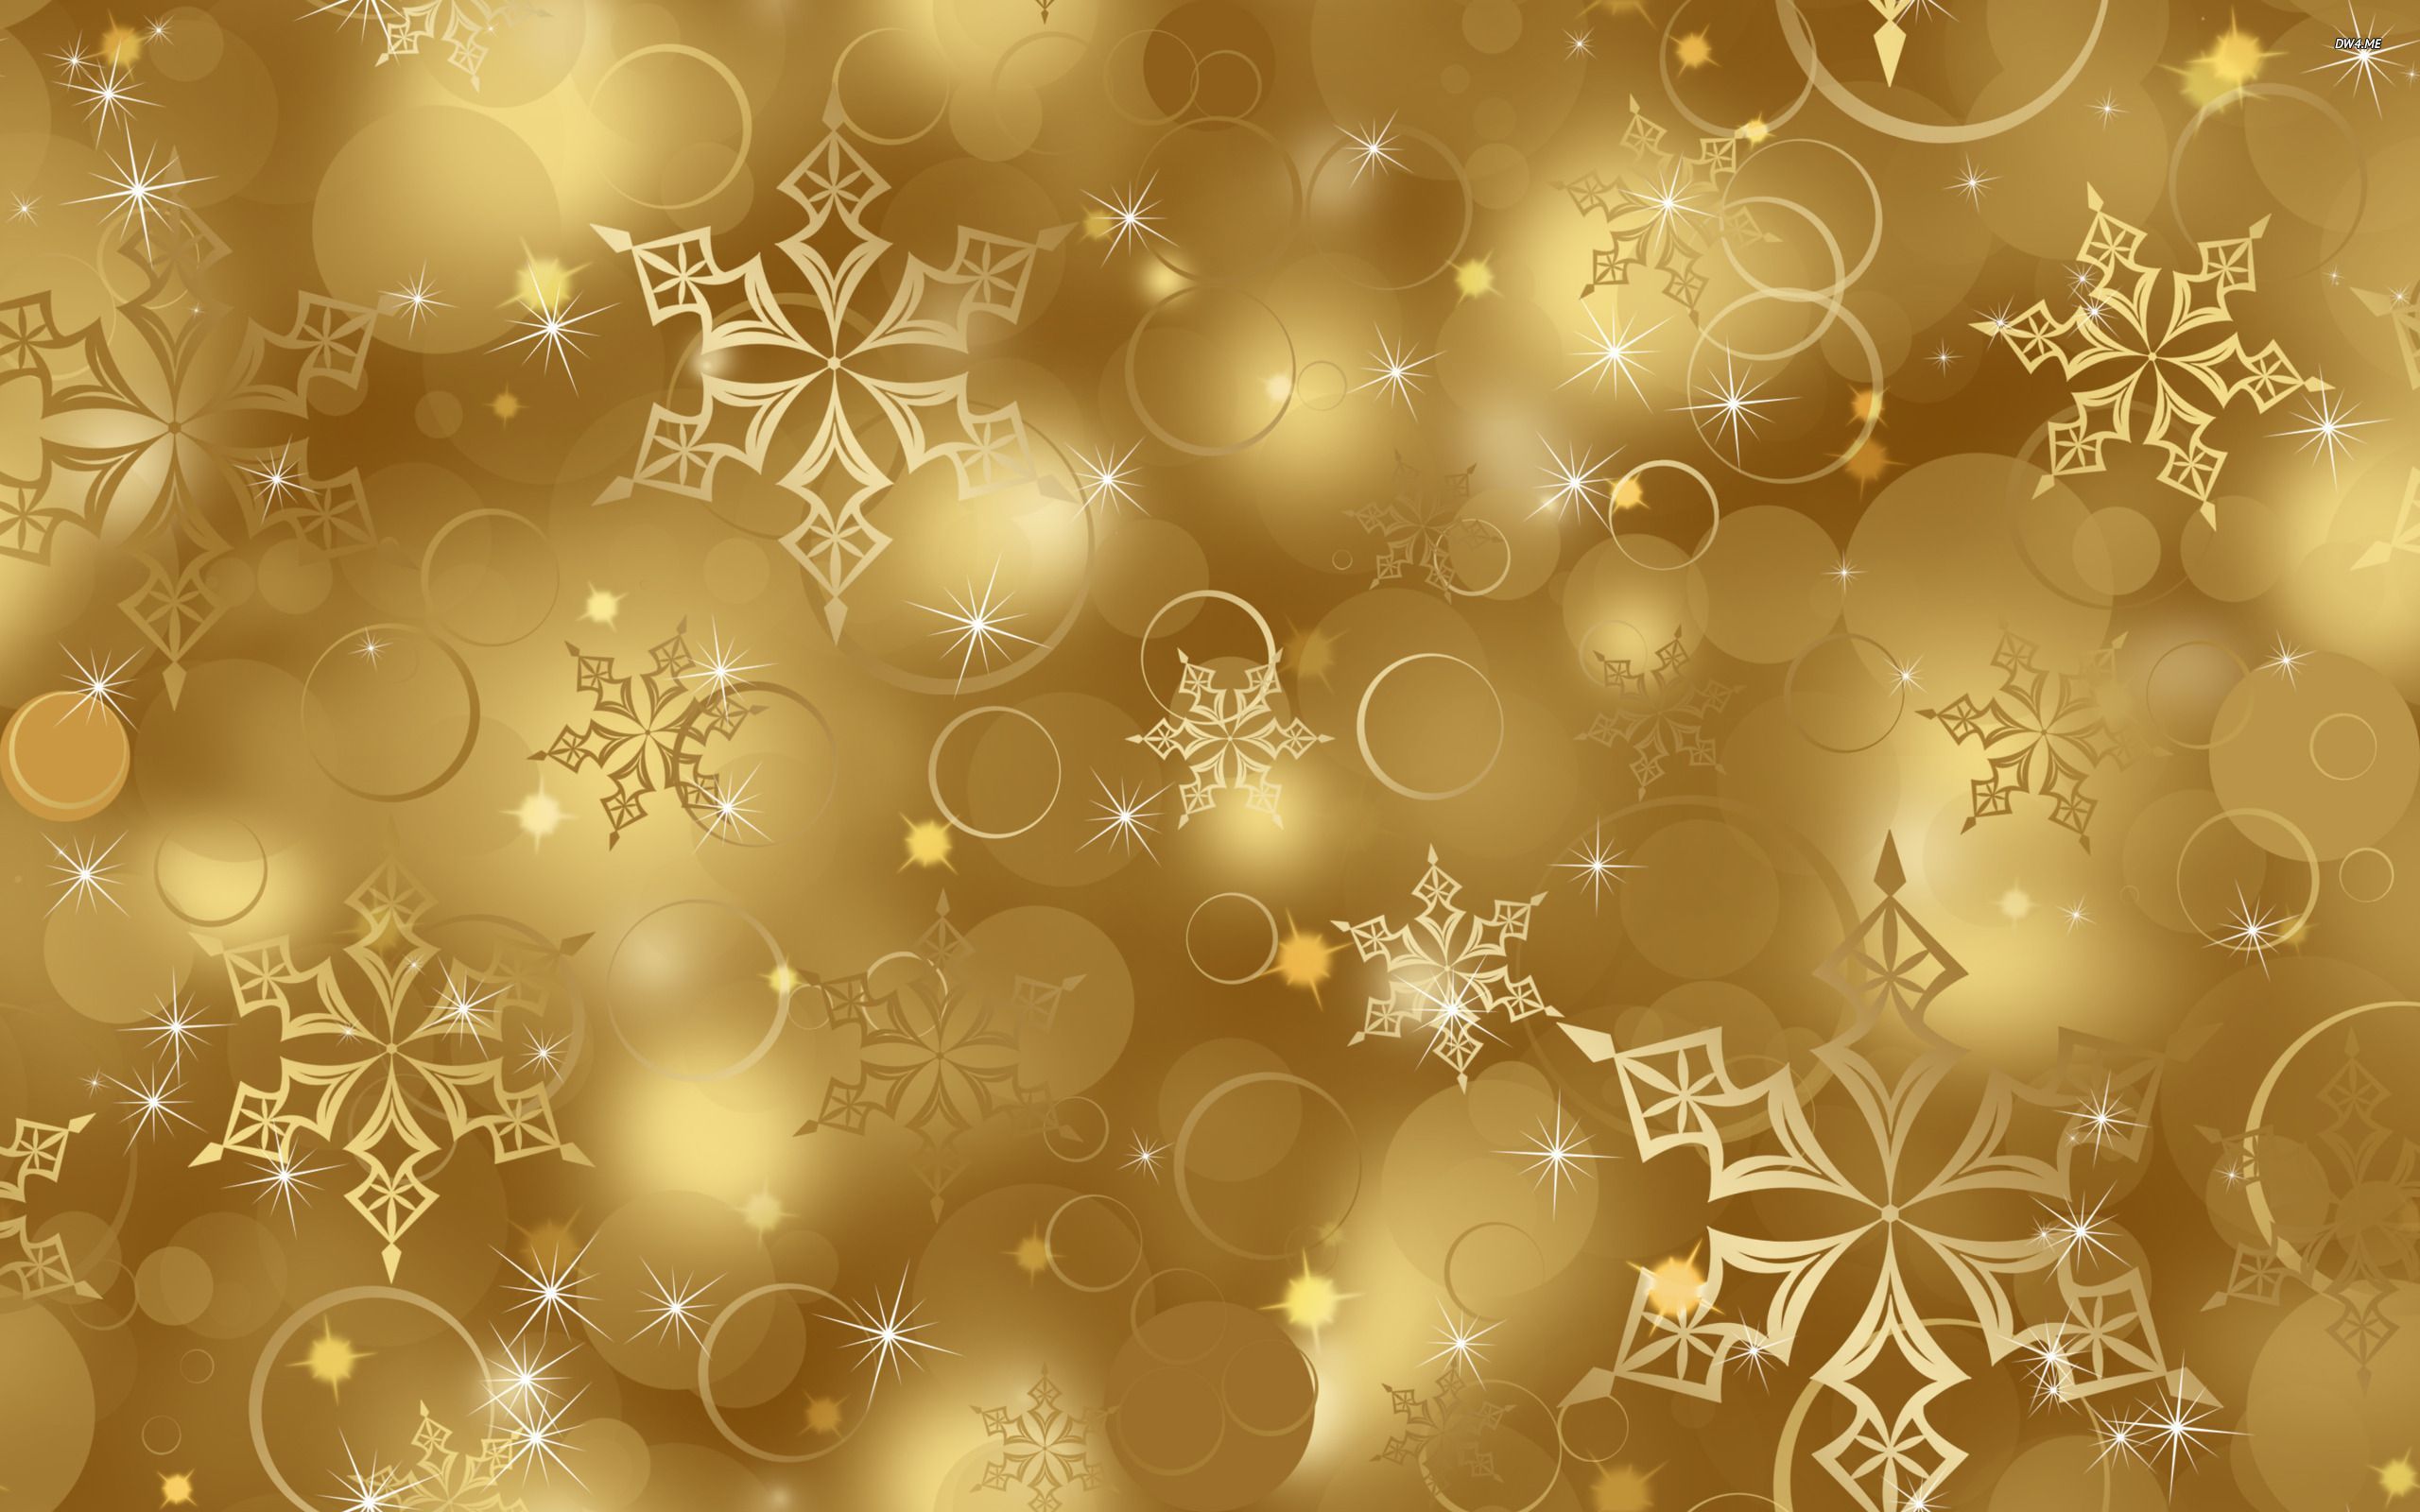 Gold and White Desktop Wallpaper Free Gold and White Desktop Background